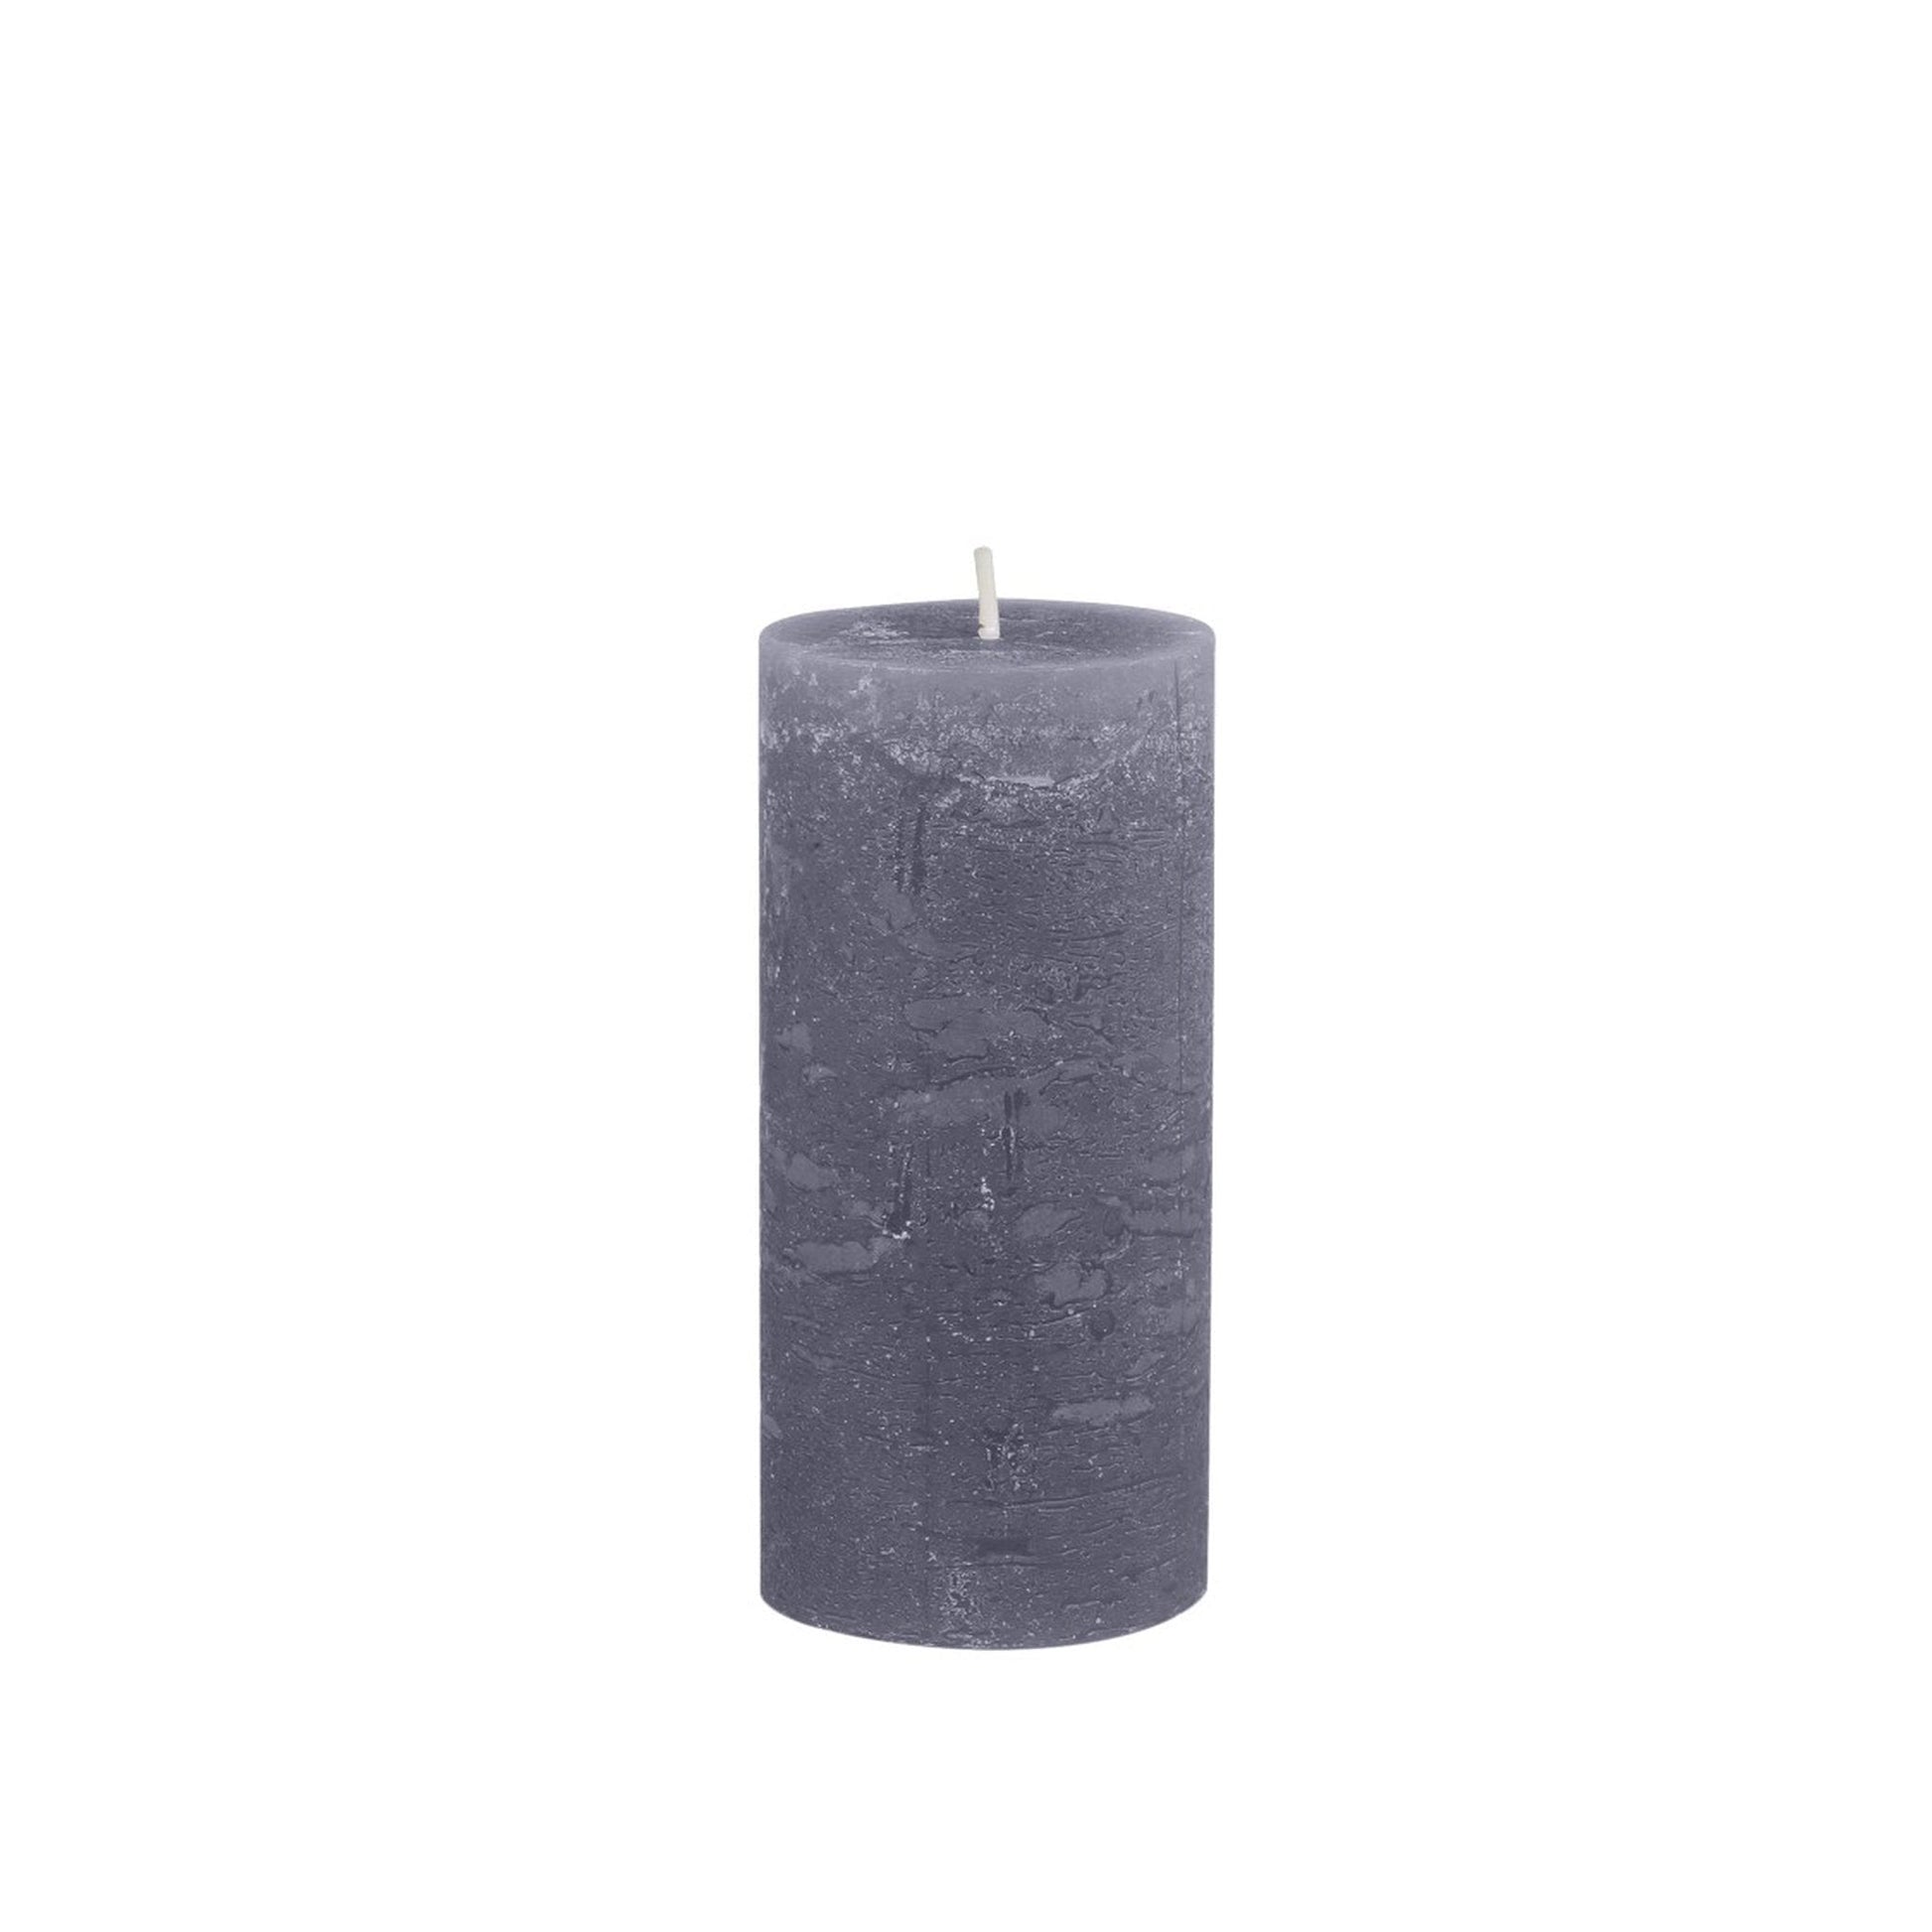 Stone Rustic Pillar Candle 60 hours - Bumble Living